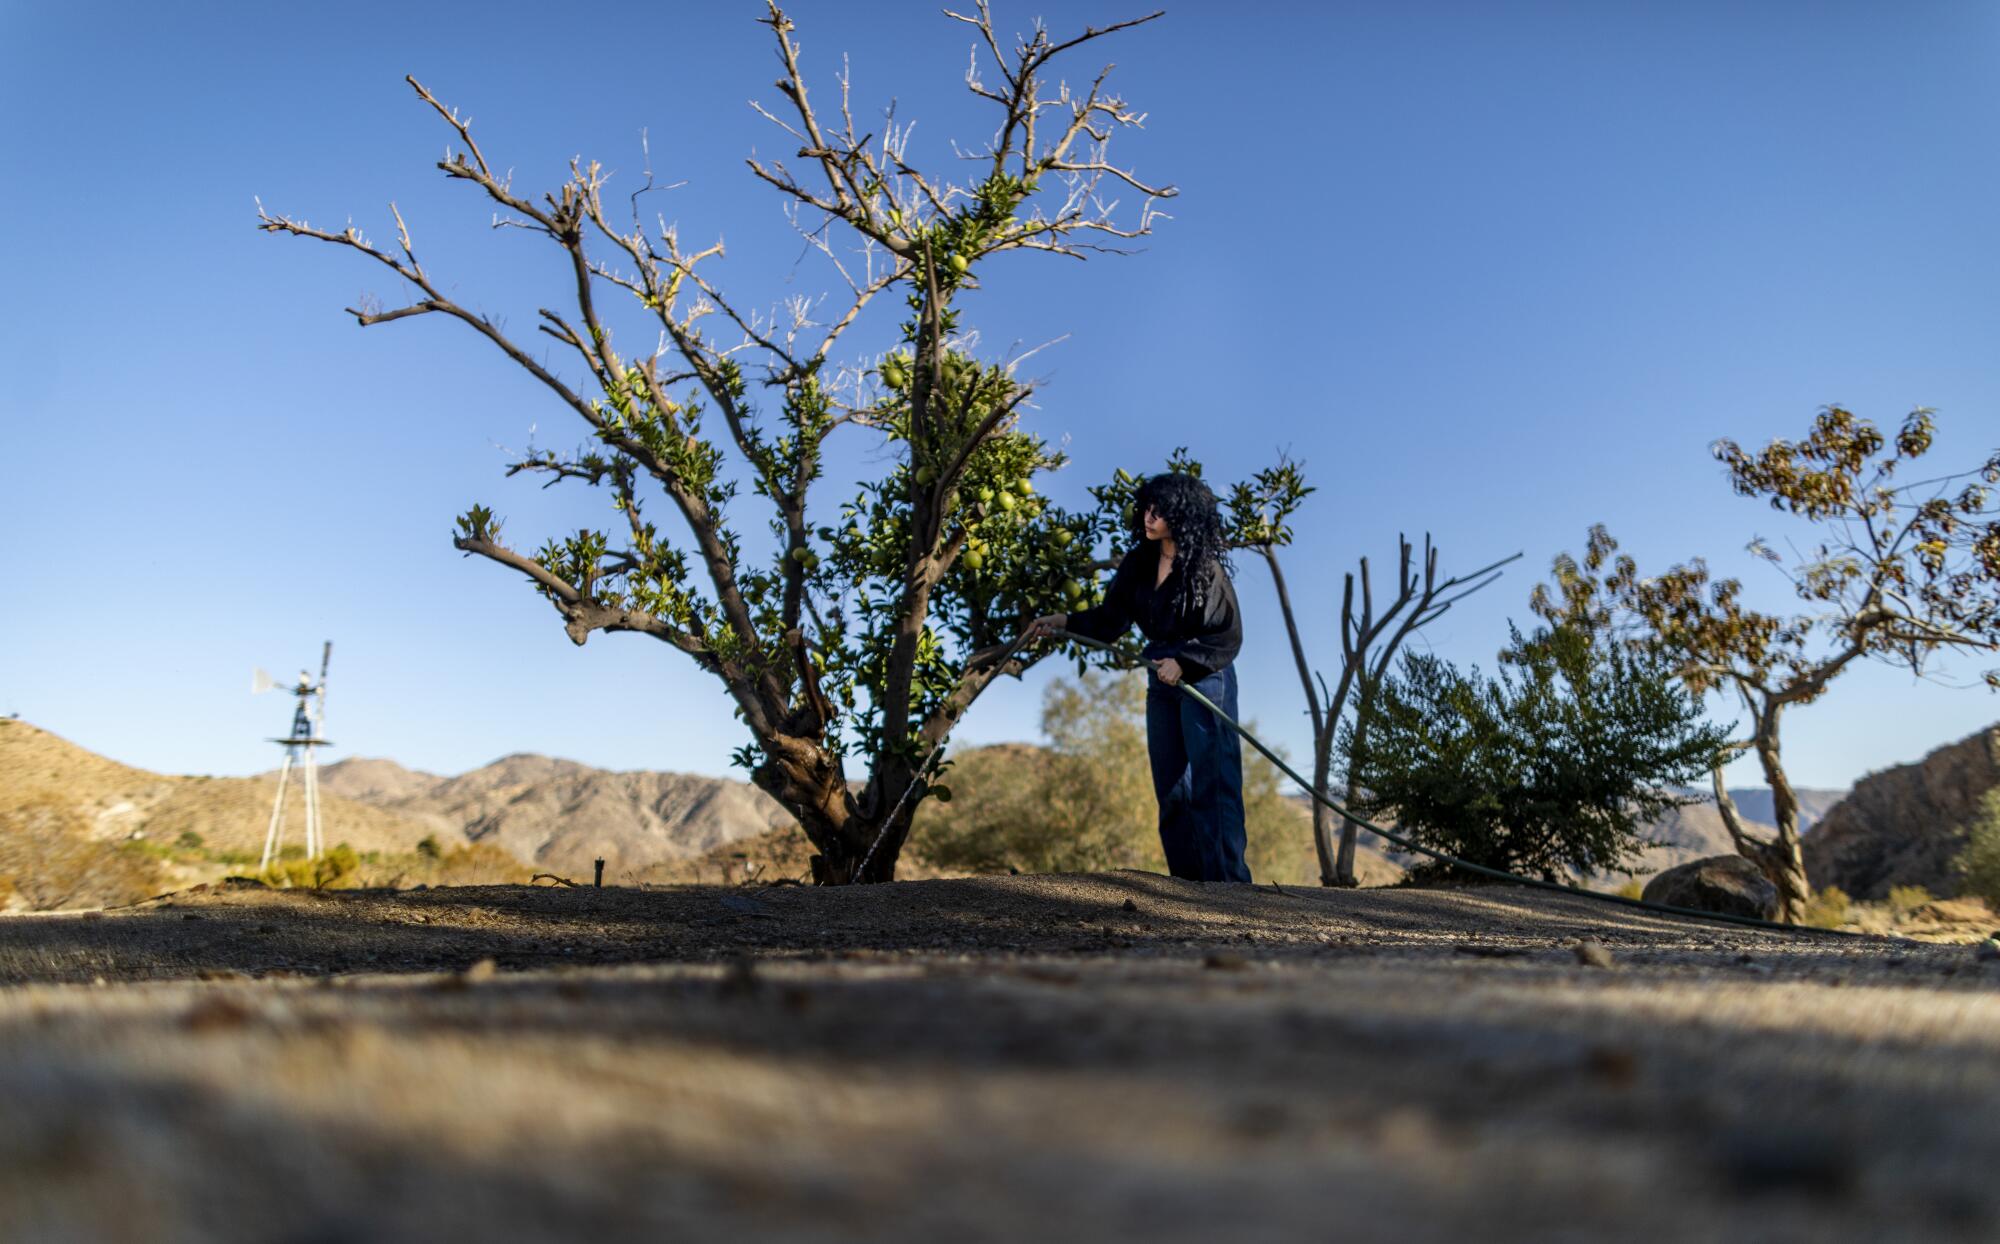 Evanice Holz waters an orange tree she brought back to life on the property near her home in Morongo Valley.